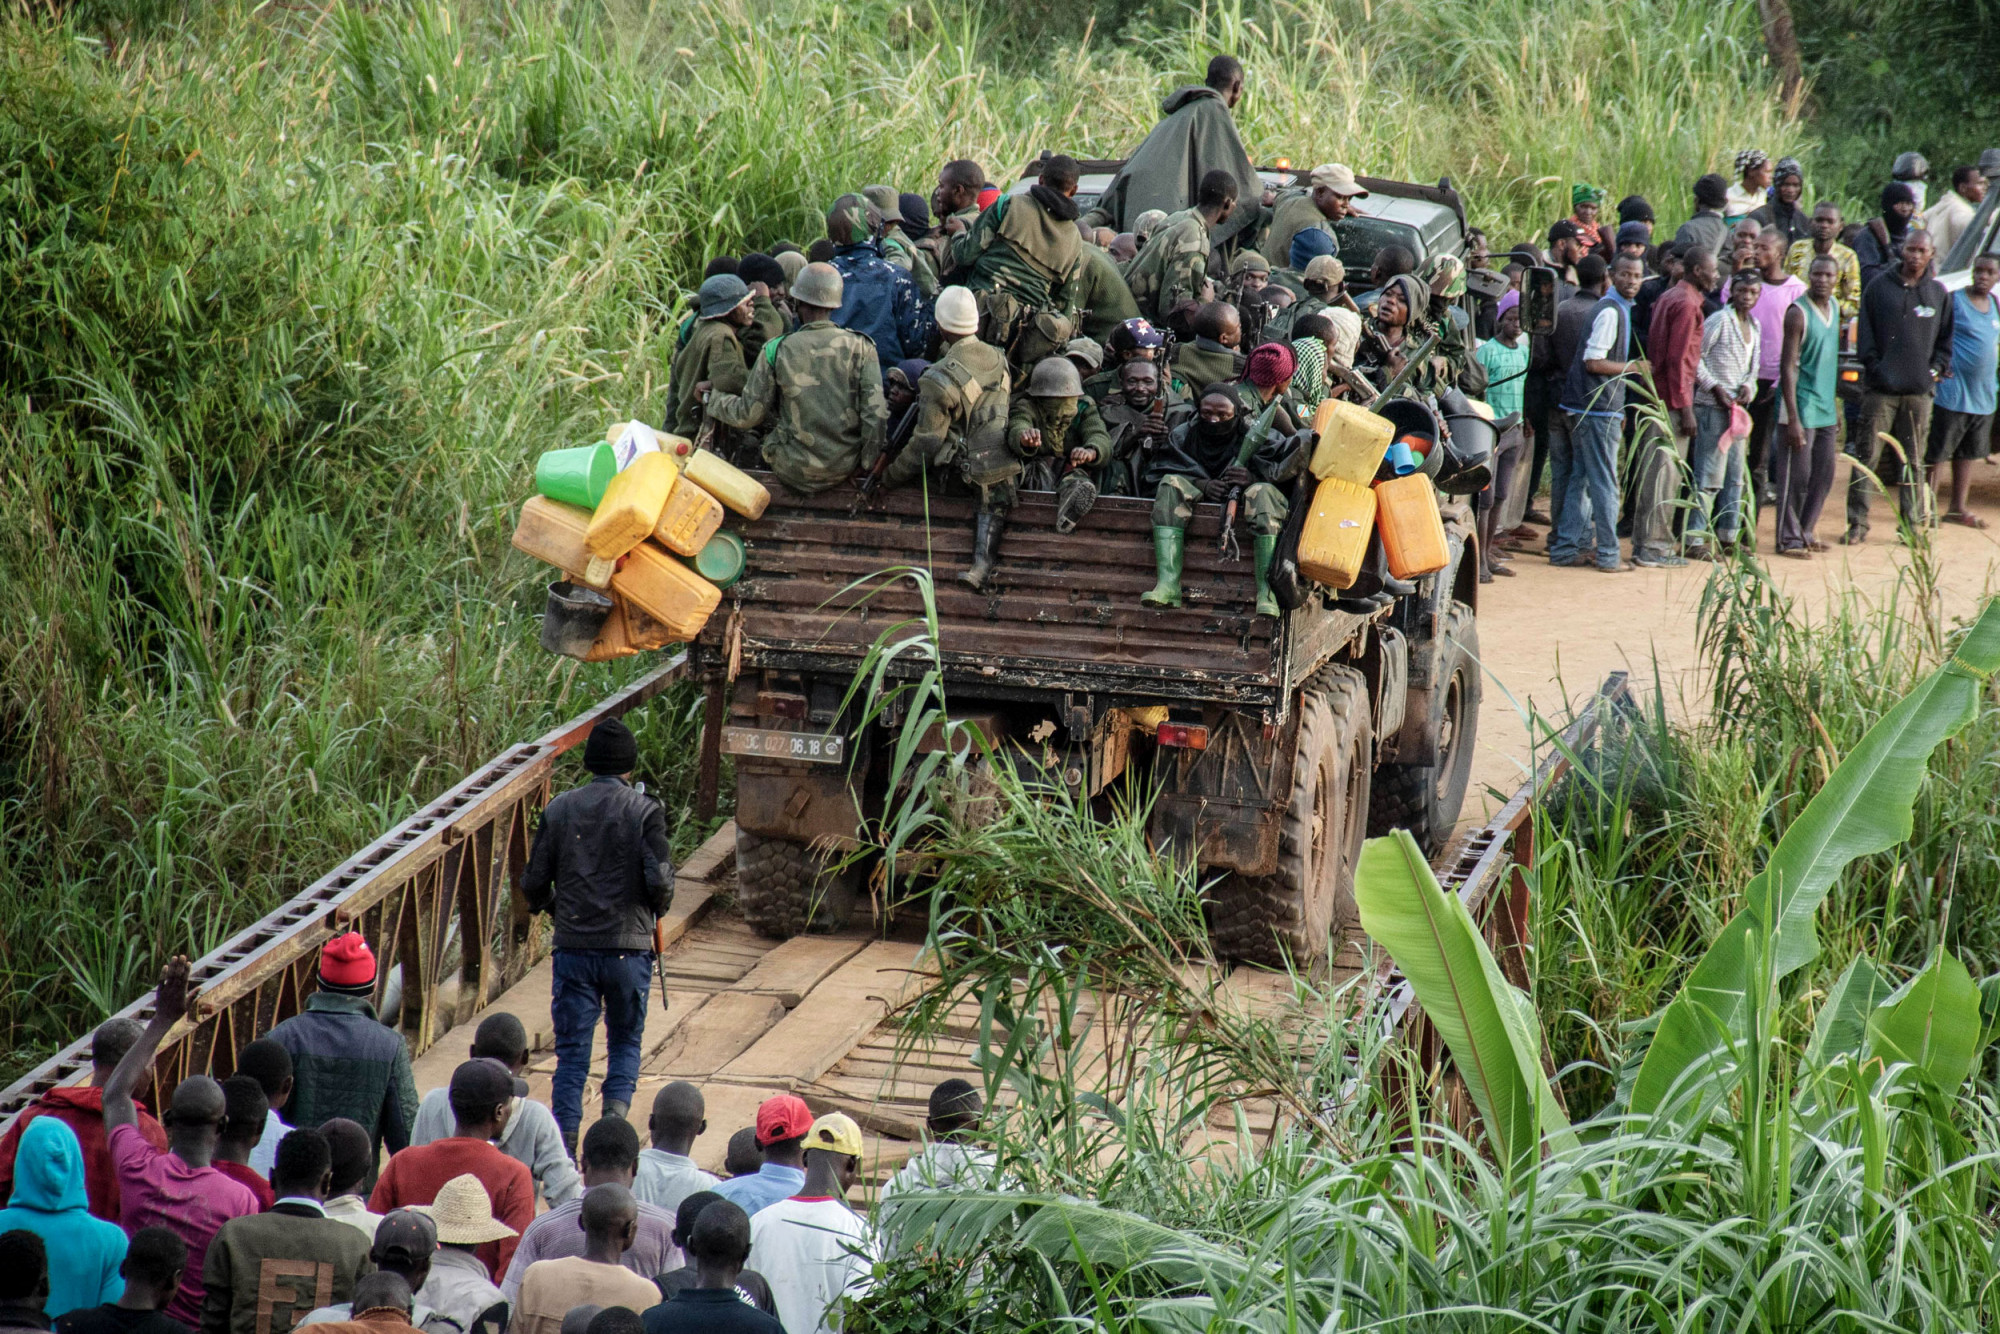 Northeastern Ituri Province, DRC, April 2020. Congolese government troops ride a truck past people fleeing their villages as they deploy toward the front line about 15 kilometers north of the city of Bunia in Congo’s northeastern Ituri Province during clashes against the Cooperative for the Development of Congo (CODECO), an armed political-religious sect drawn from the Lendu ethnic group, in mid-April. Assailants from the CODECO militia had just killed 22 people in the village of Koli while they were asleep, according to local officials in the town of Djugu, who said all the dead were from the Hema ethnic group. © Dieudonne Dirole for Fondation Carmignac